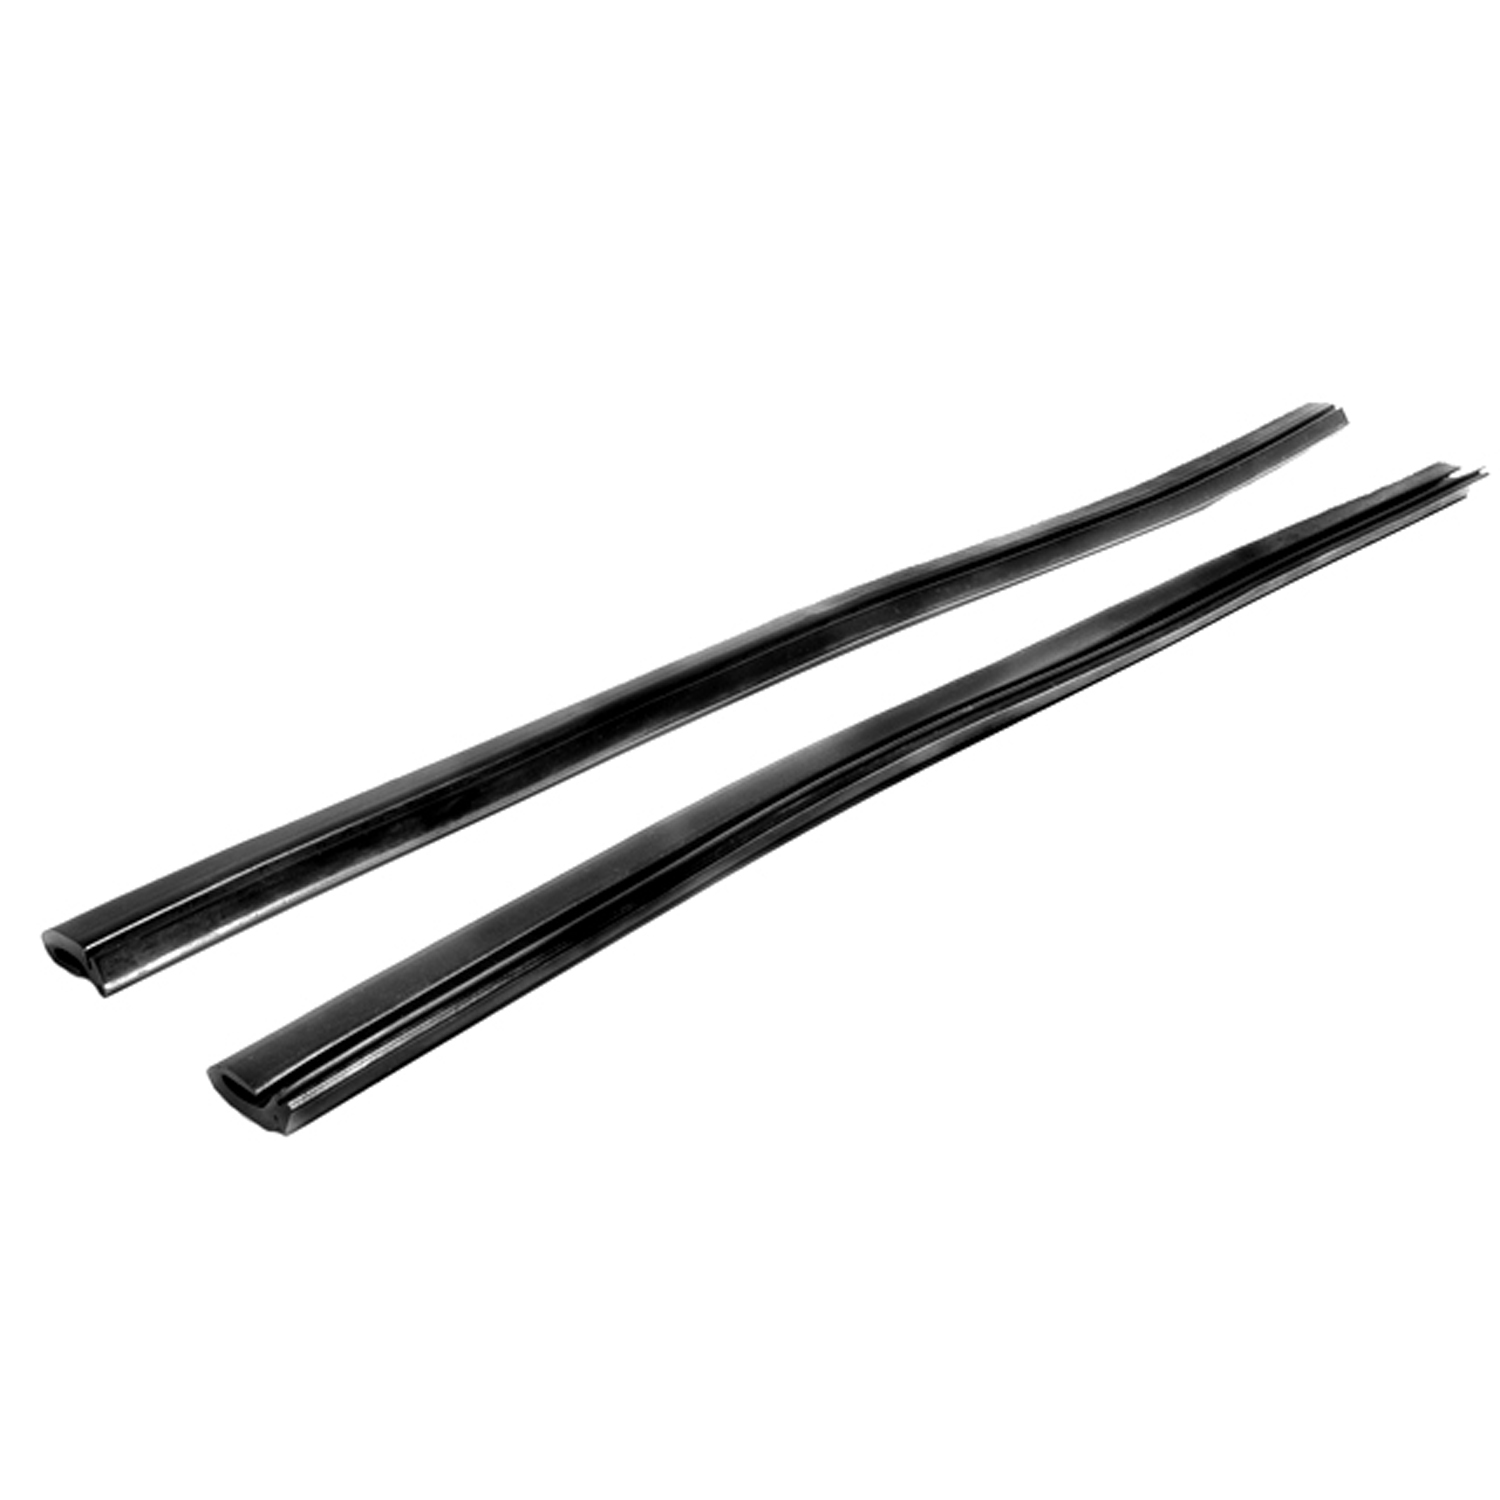 1968 Ford LTD Rear Side Roll-Up Window Seal, for Hardtops and Convertibles-VS 3